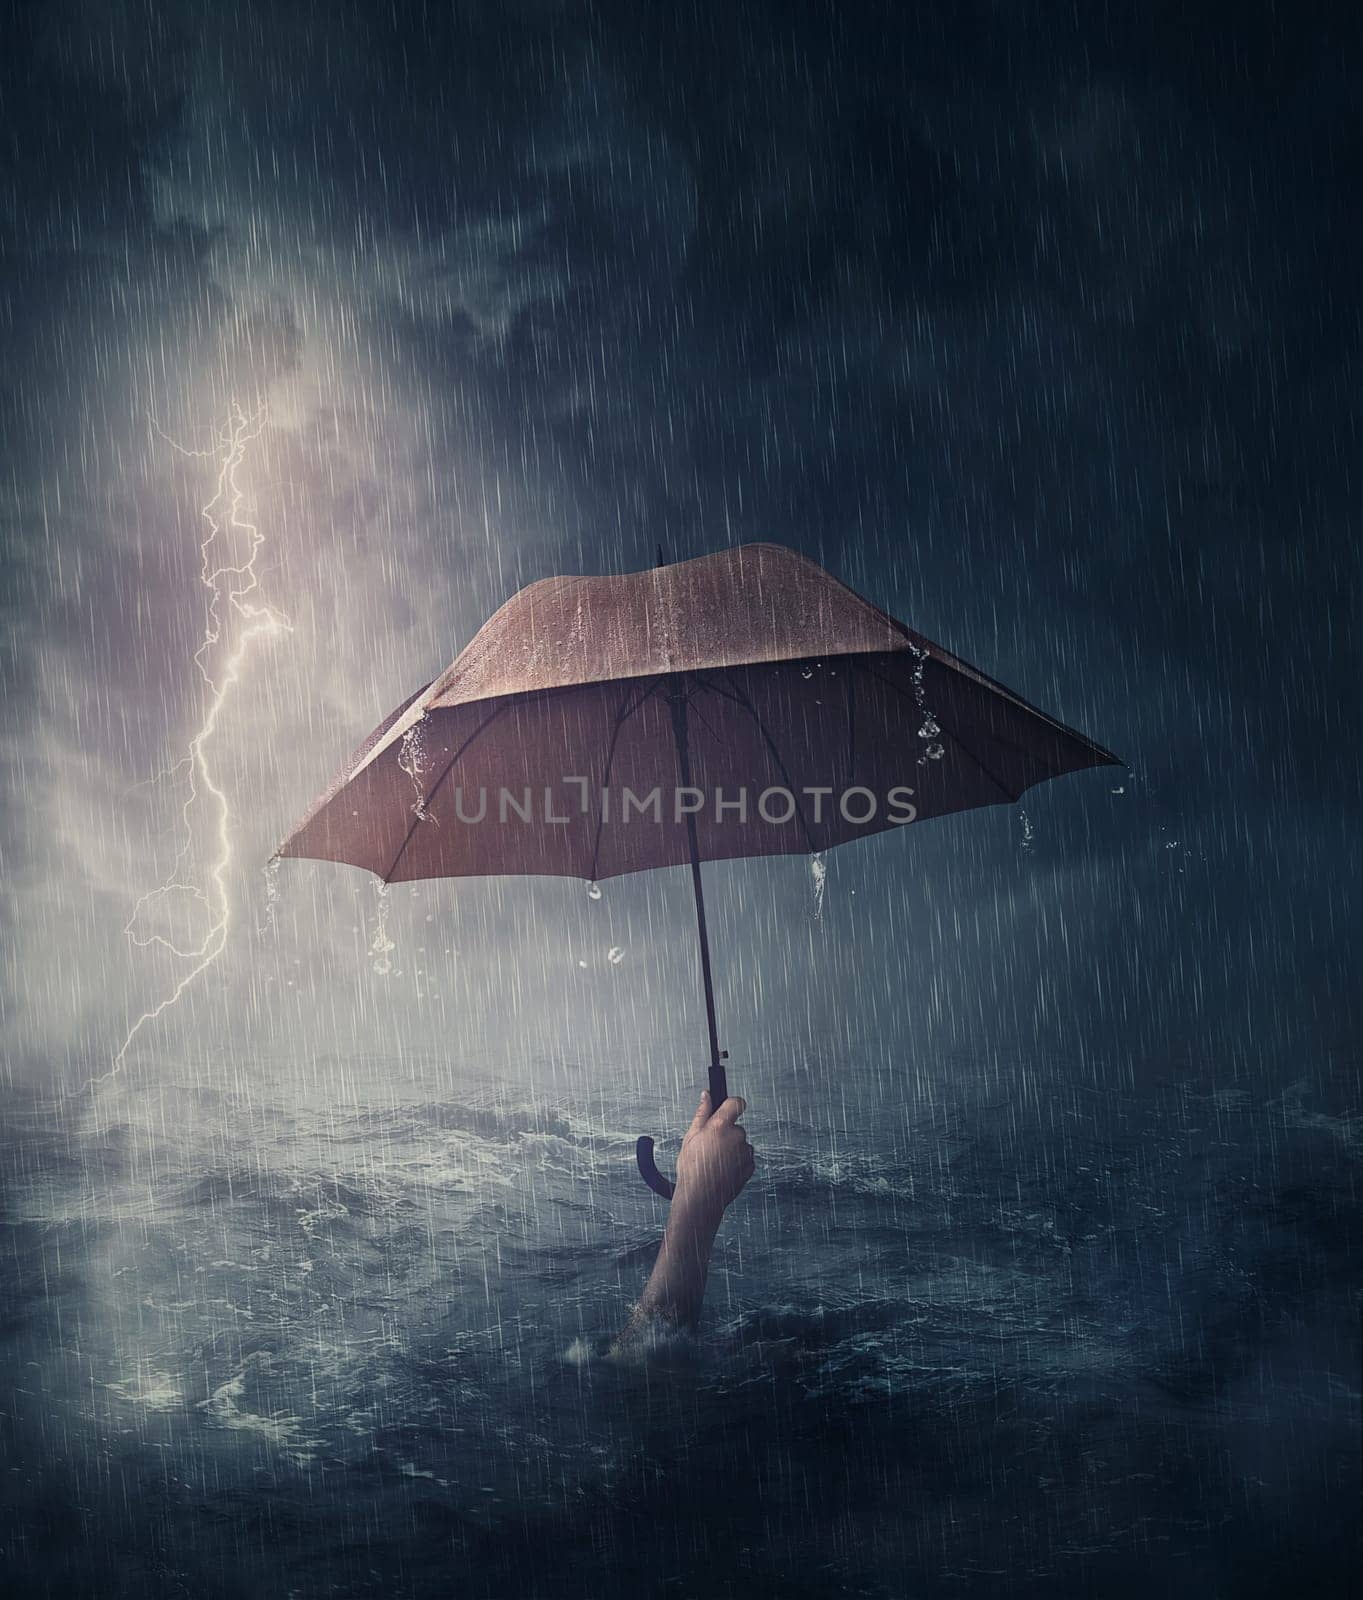 Human hand holding an umbrella sinking in the ocean. Surreal and dramatic scene of person drowning in the sea waters under the storm. Business despair and failure metaphor. Crisis problems concept by psychoshadow